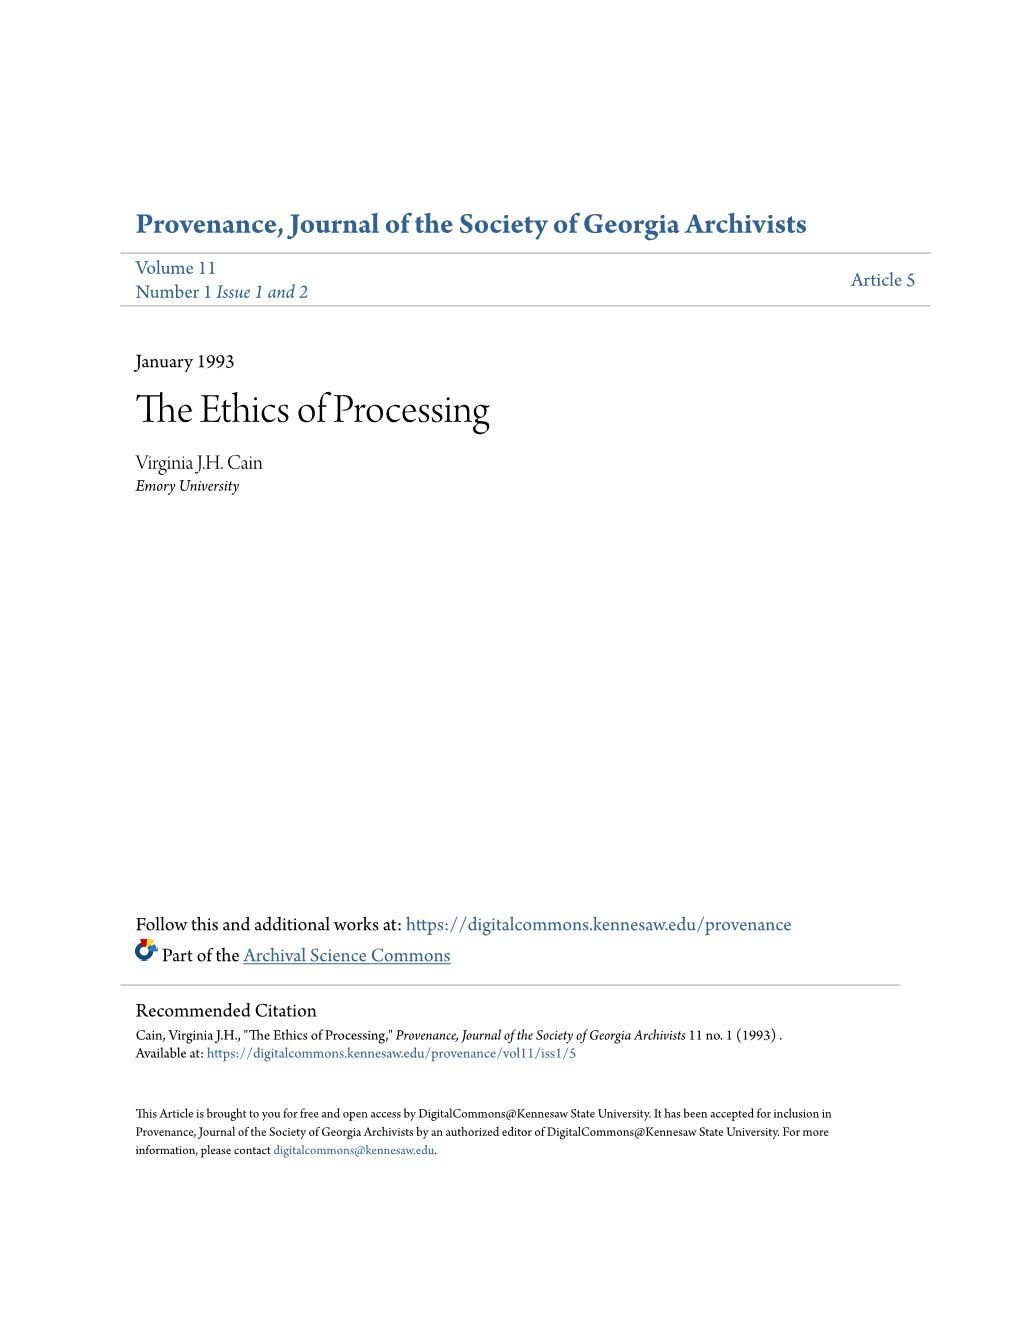 The Ethics of Processing